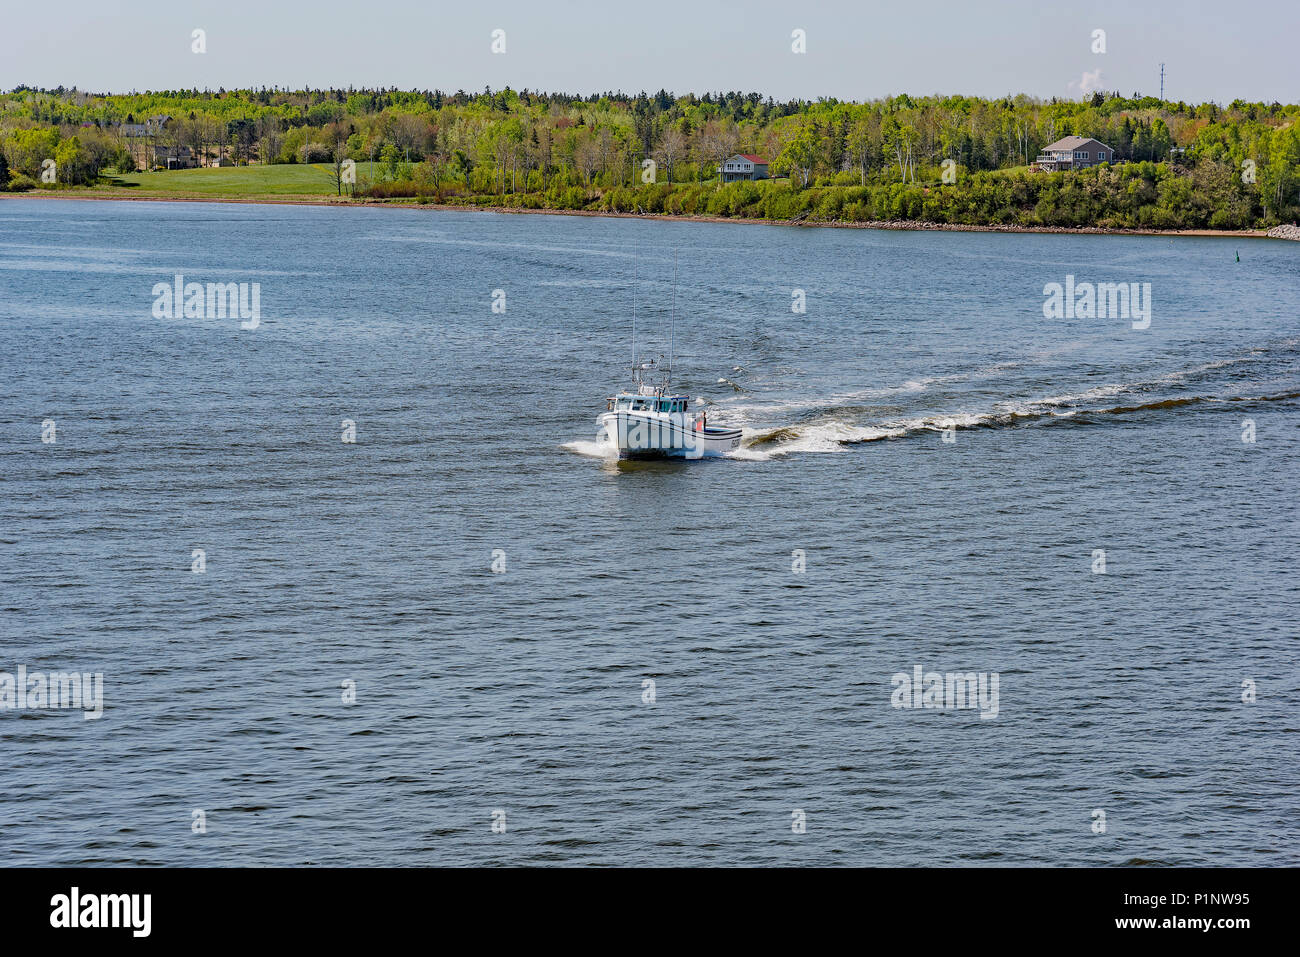 Lobster boat coming out of Caribou, Nova Scotia, Canada. Photo taken from the Woods Island, P.E.I. to Caribou, N.S. Ferry. Stock Photo